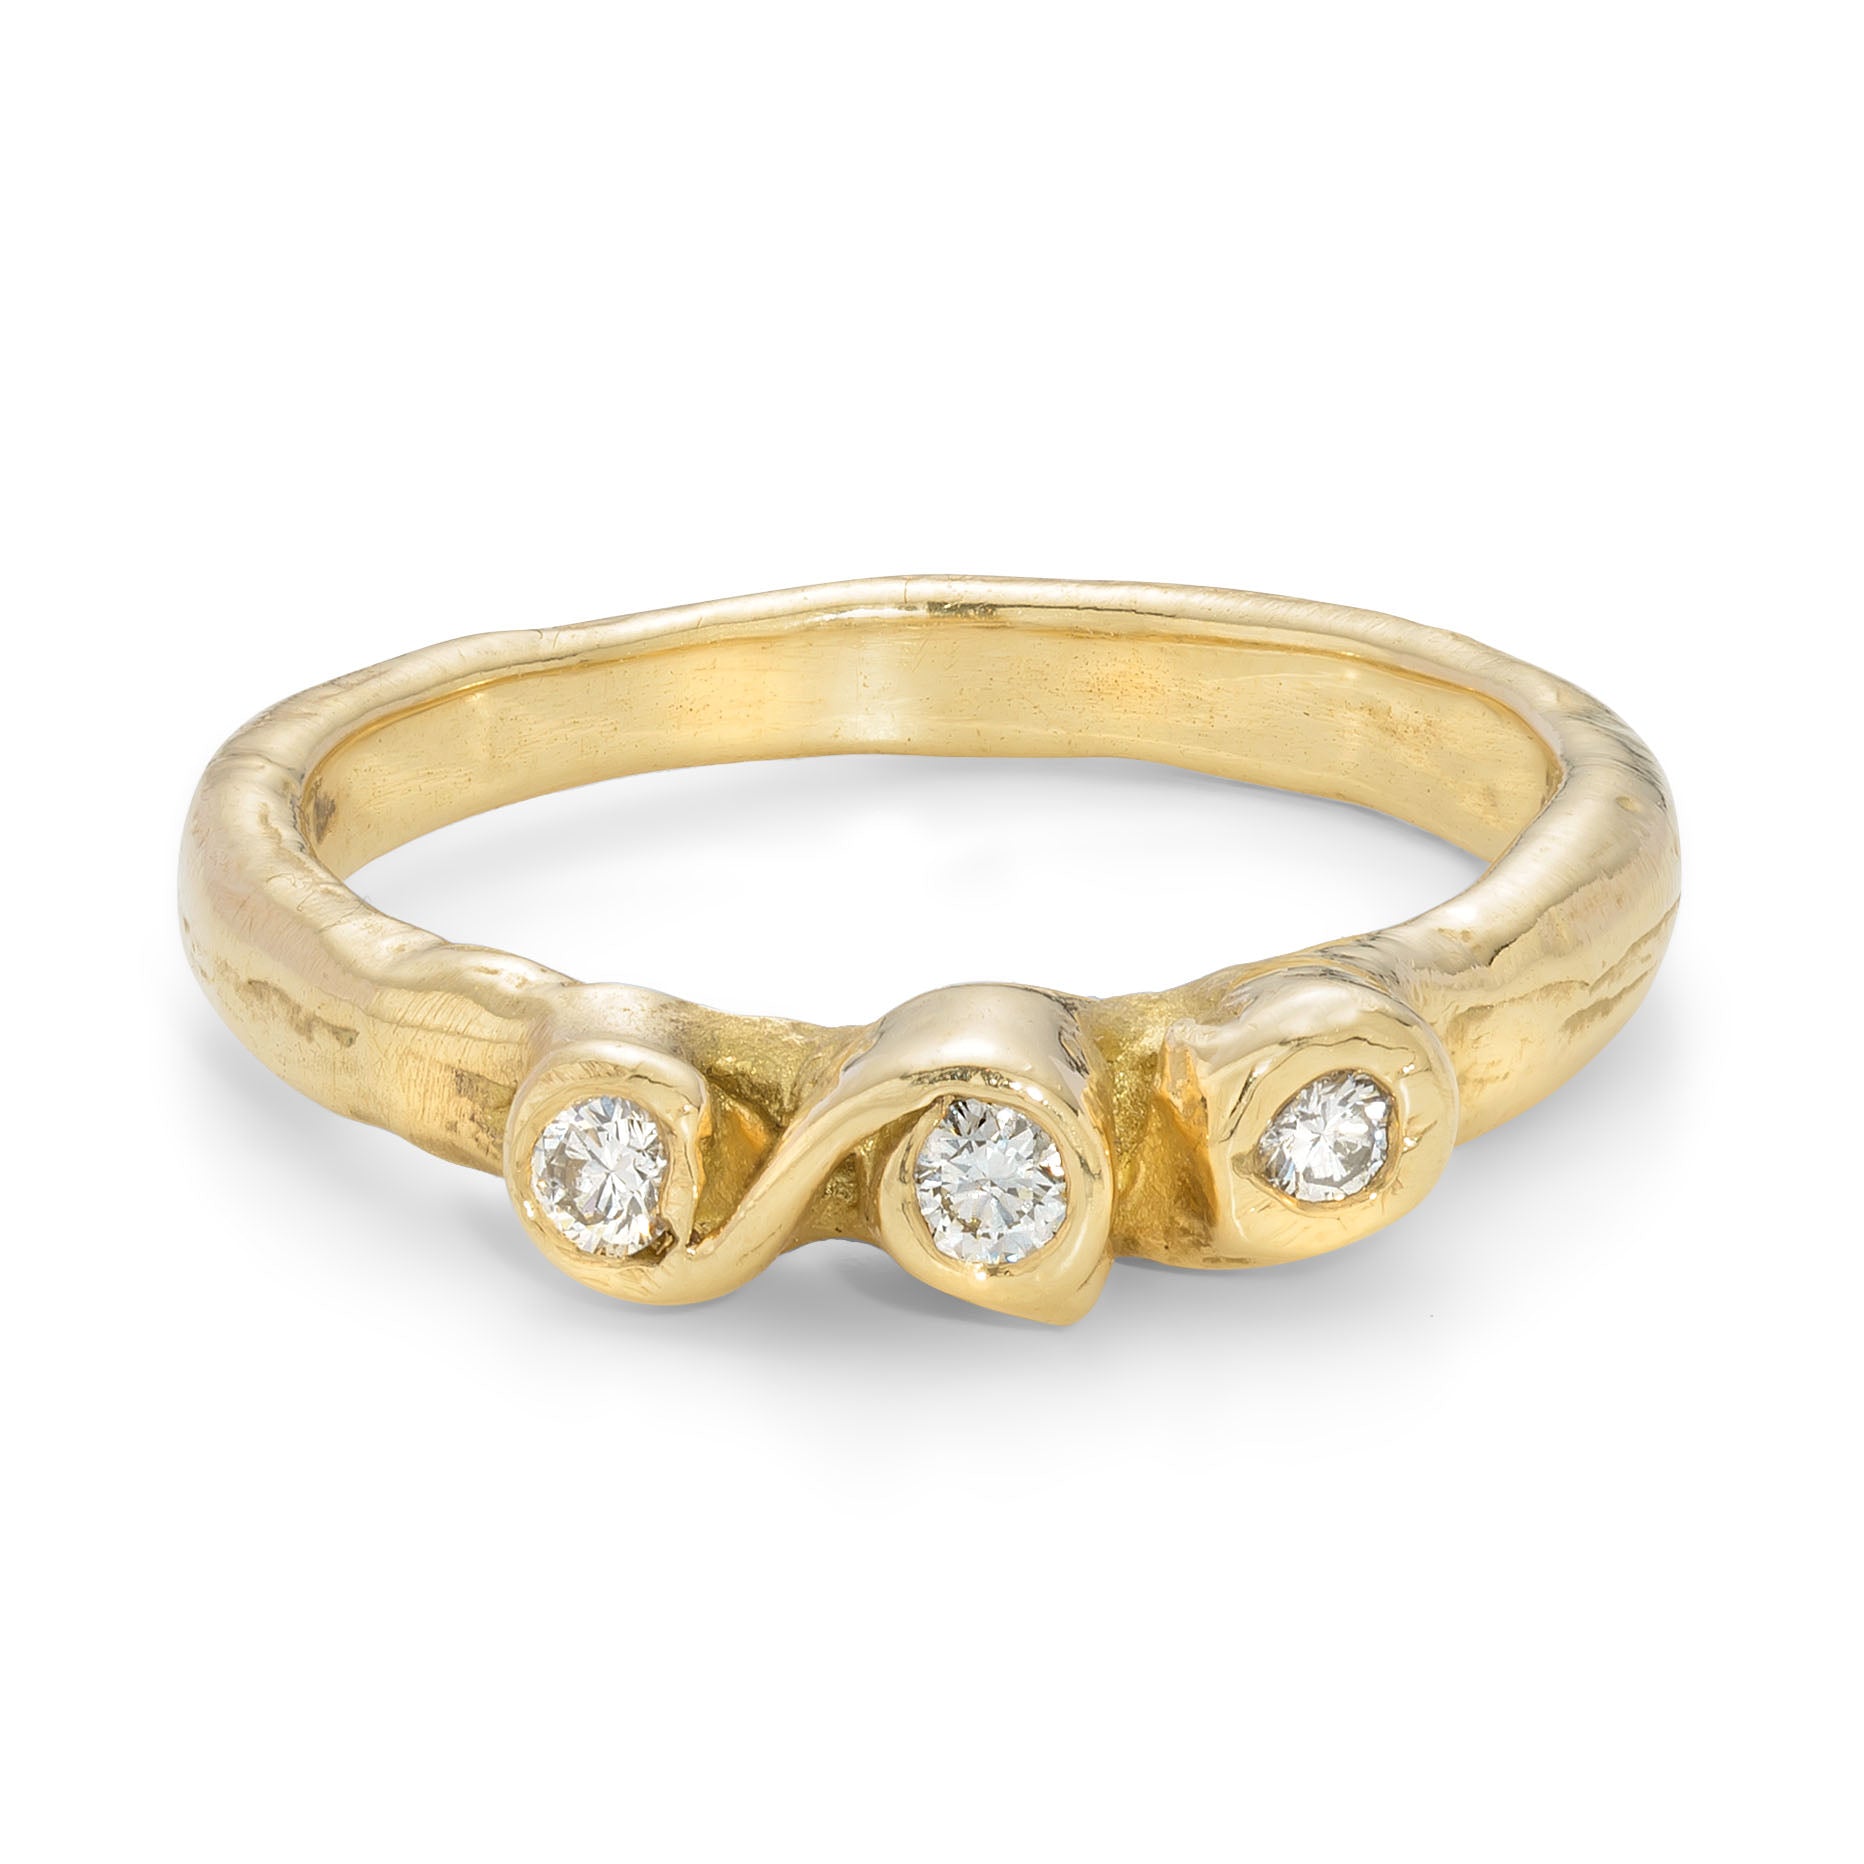 18ct Gold unique engagement ring, set with 3 diamonds, handcrafted by Emily Nixon. This ring is an organic, unusual design.